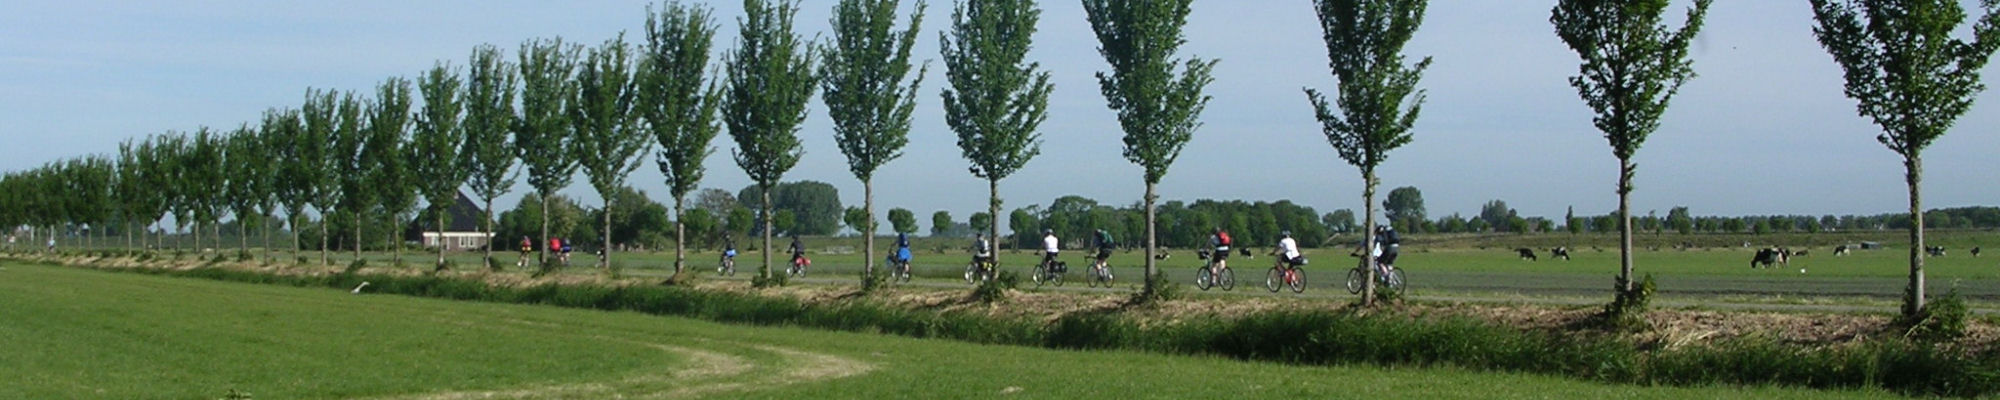 netherlands cycling